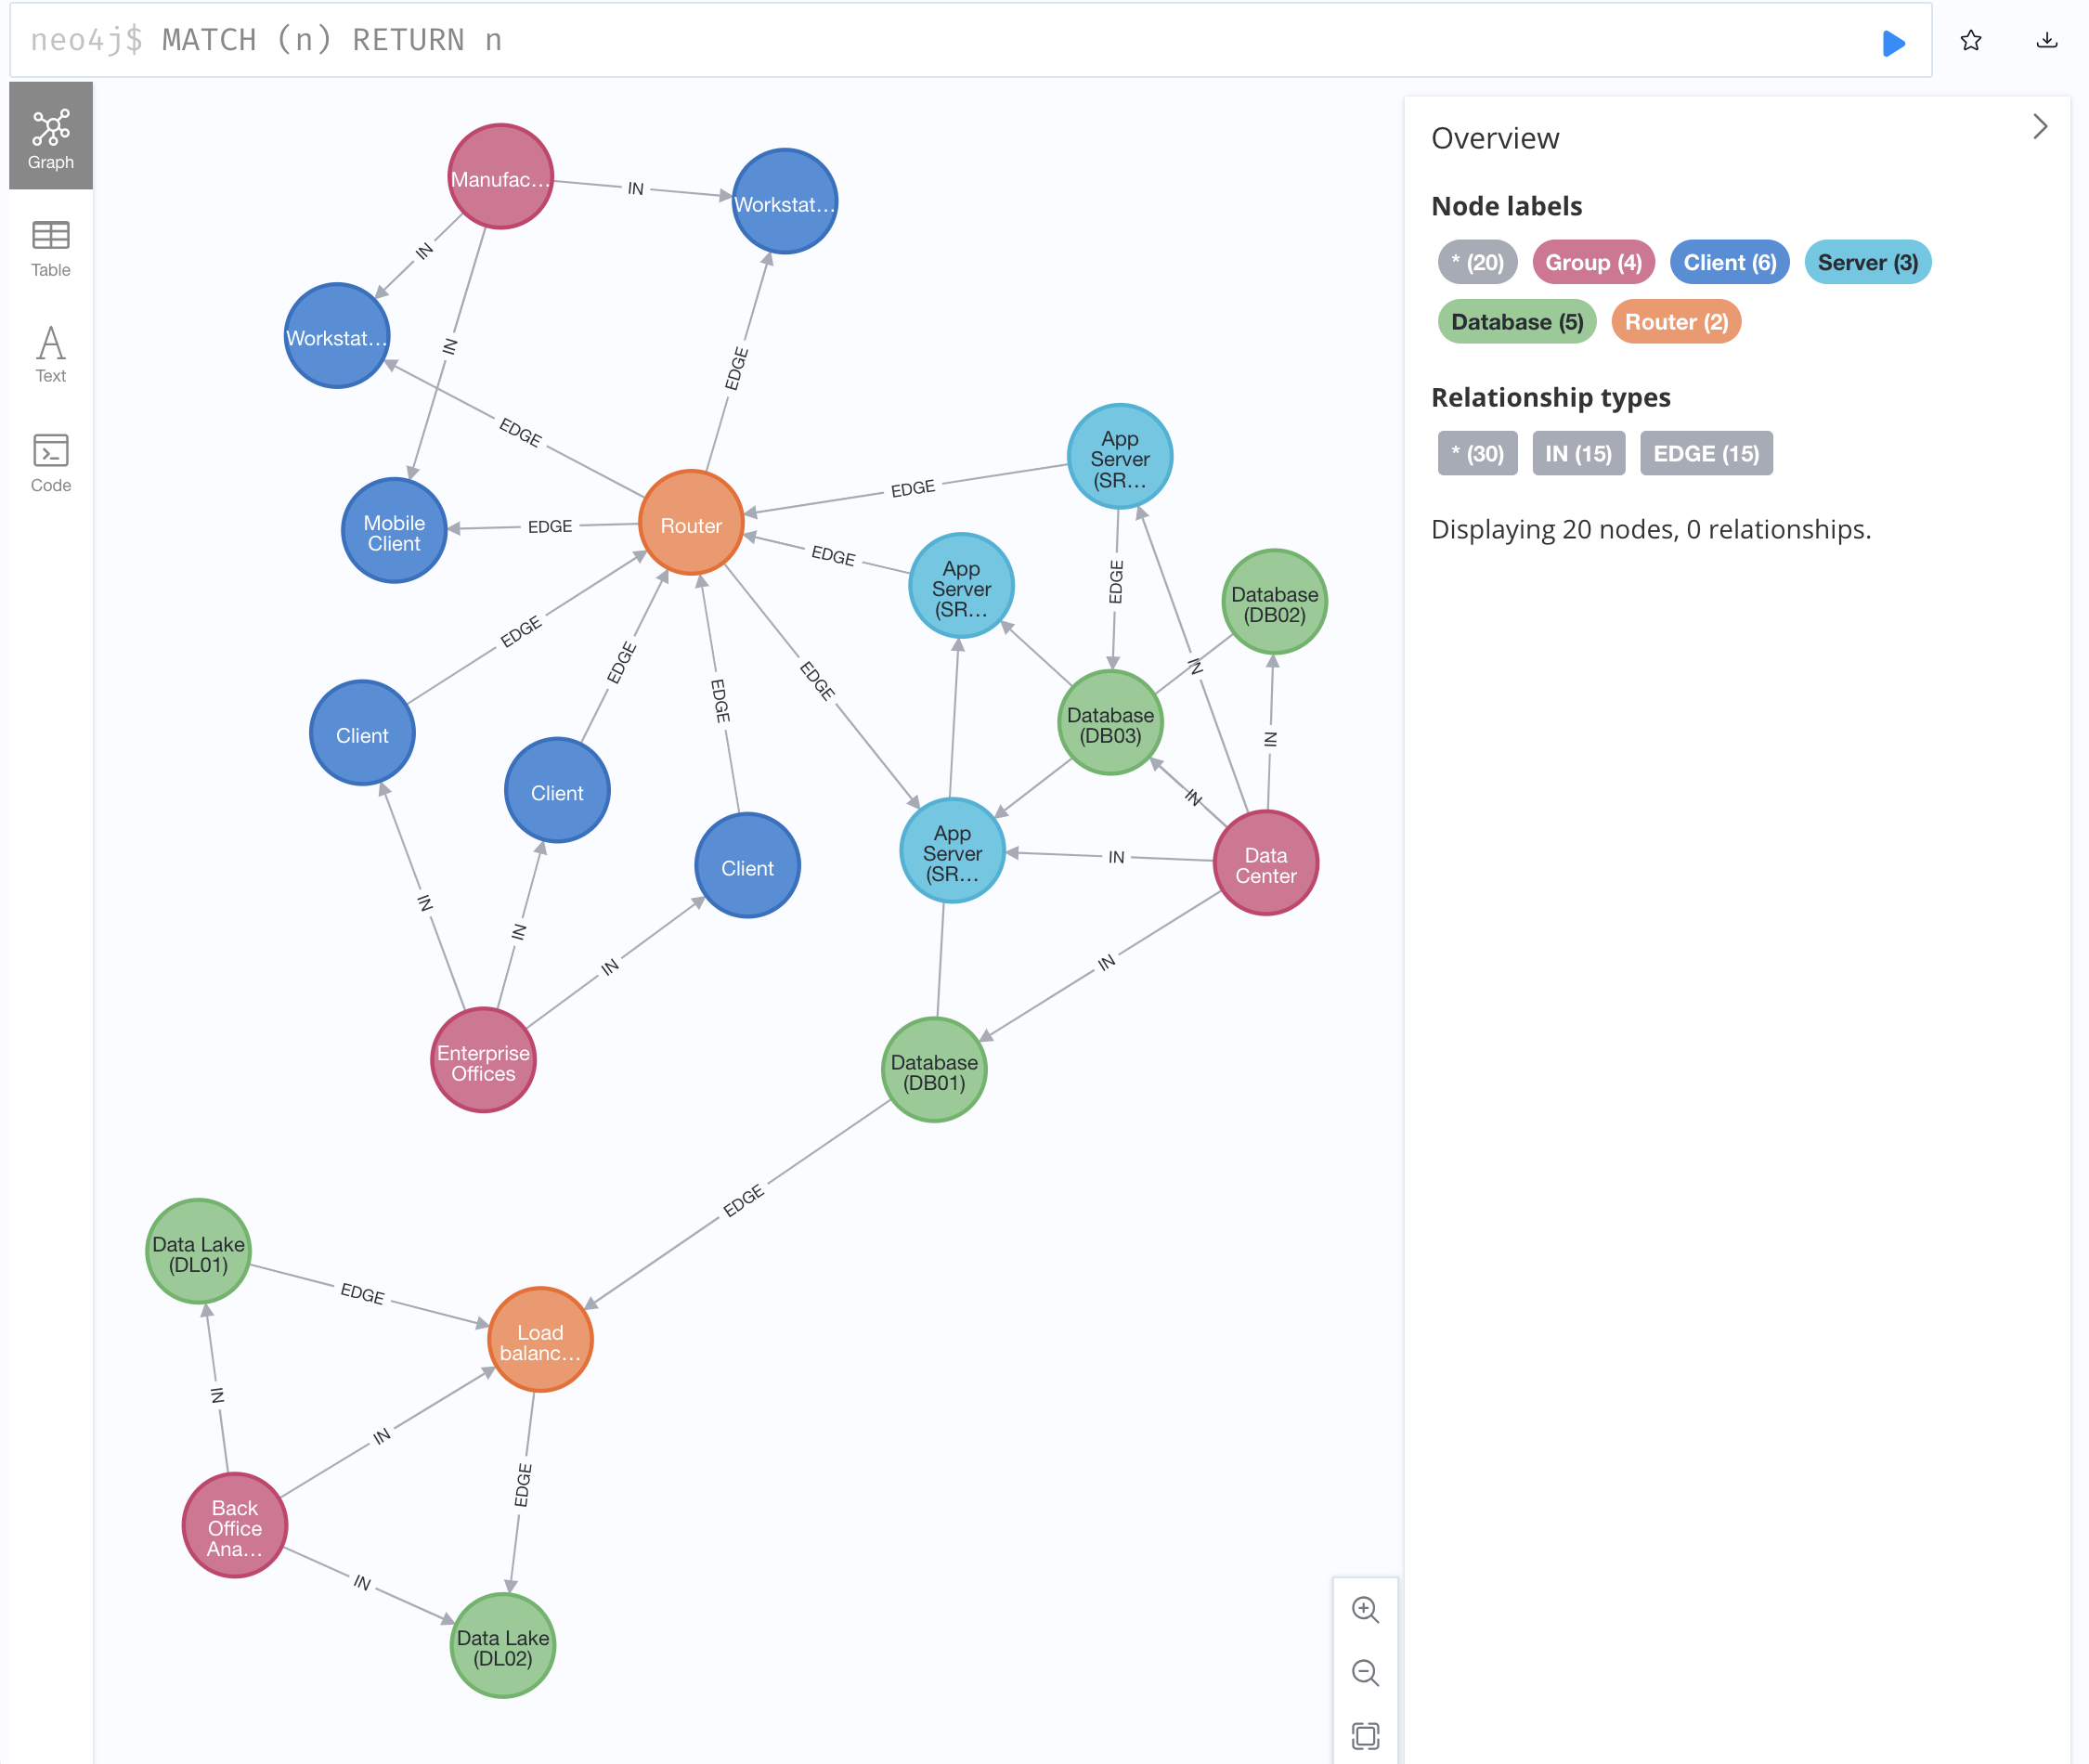 The Neo4j visualization of the graph